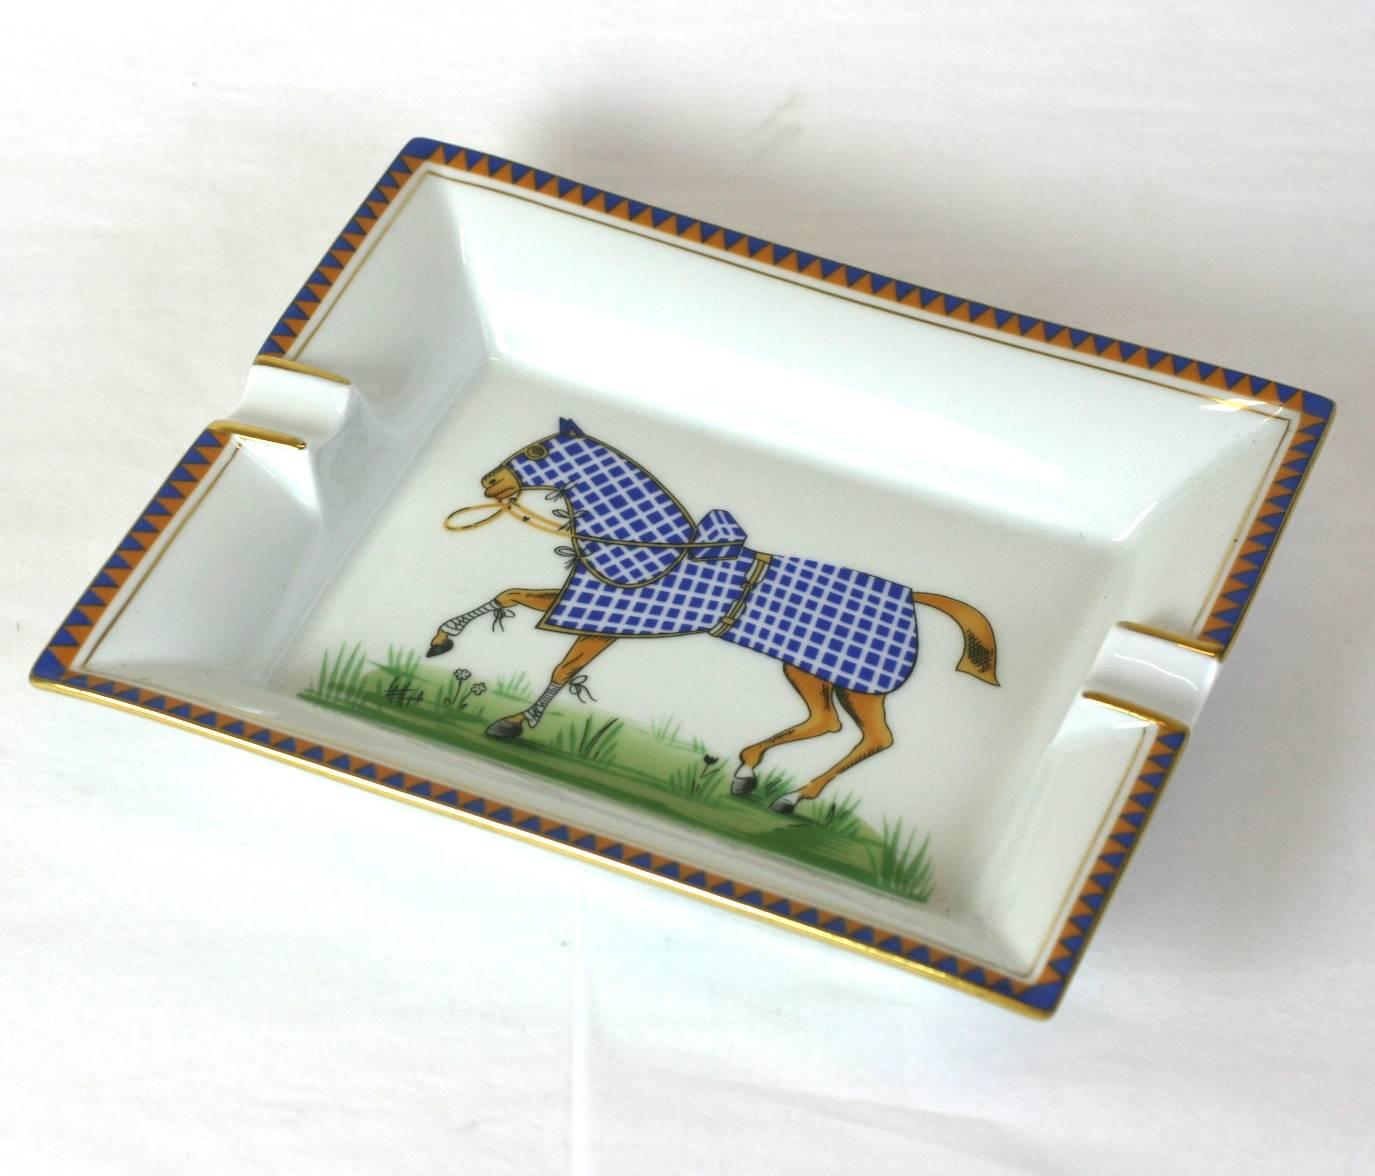 Hermes ashtray or catch all dish decorated with blue check blanketed horse, hand painted on Limoges porcelain. Suede base lining. 2000's France. 
Excellent condition.  